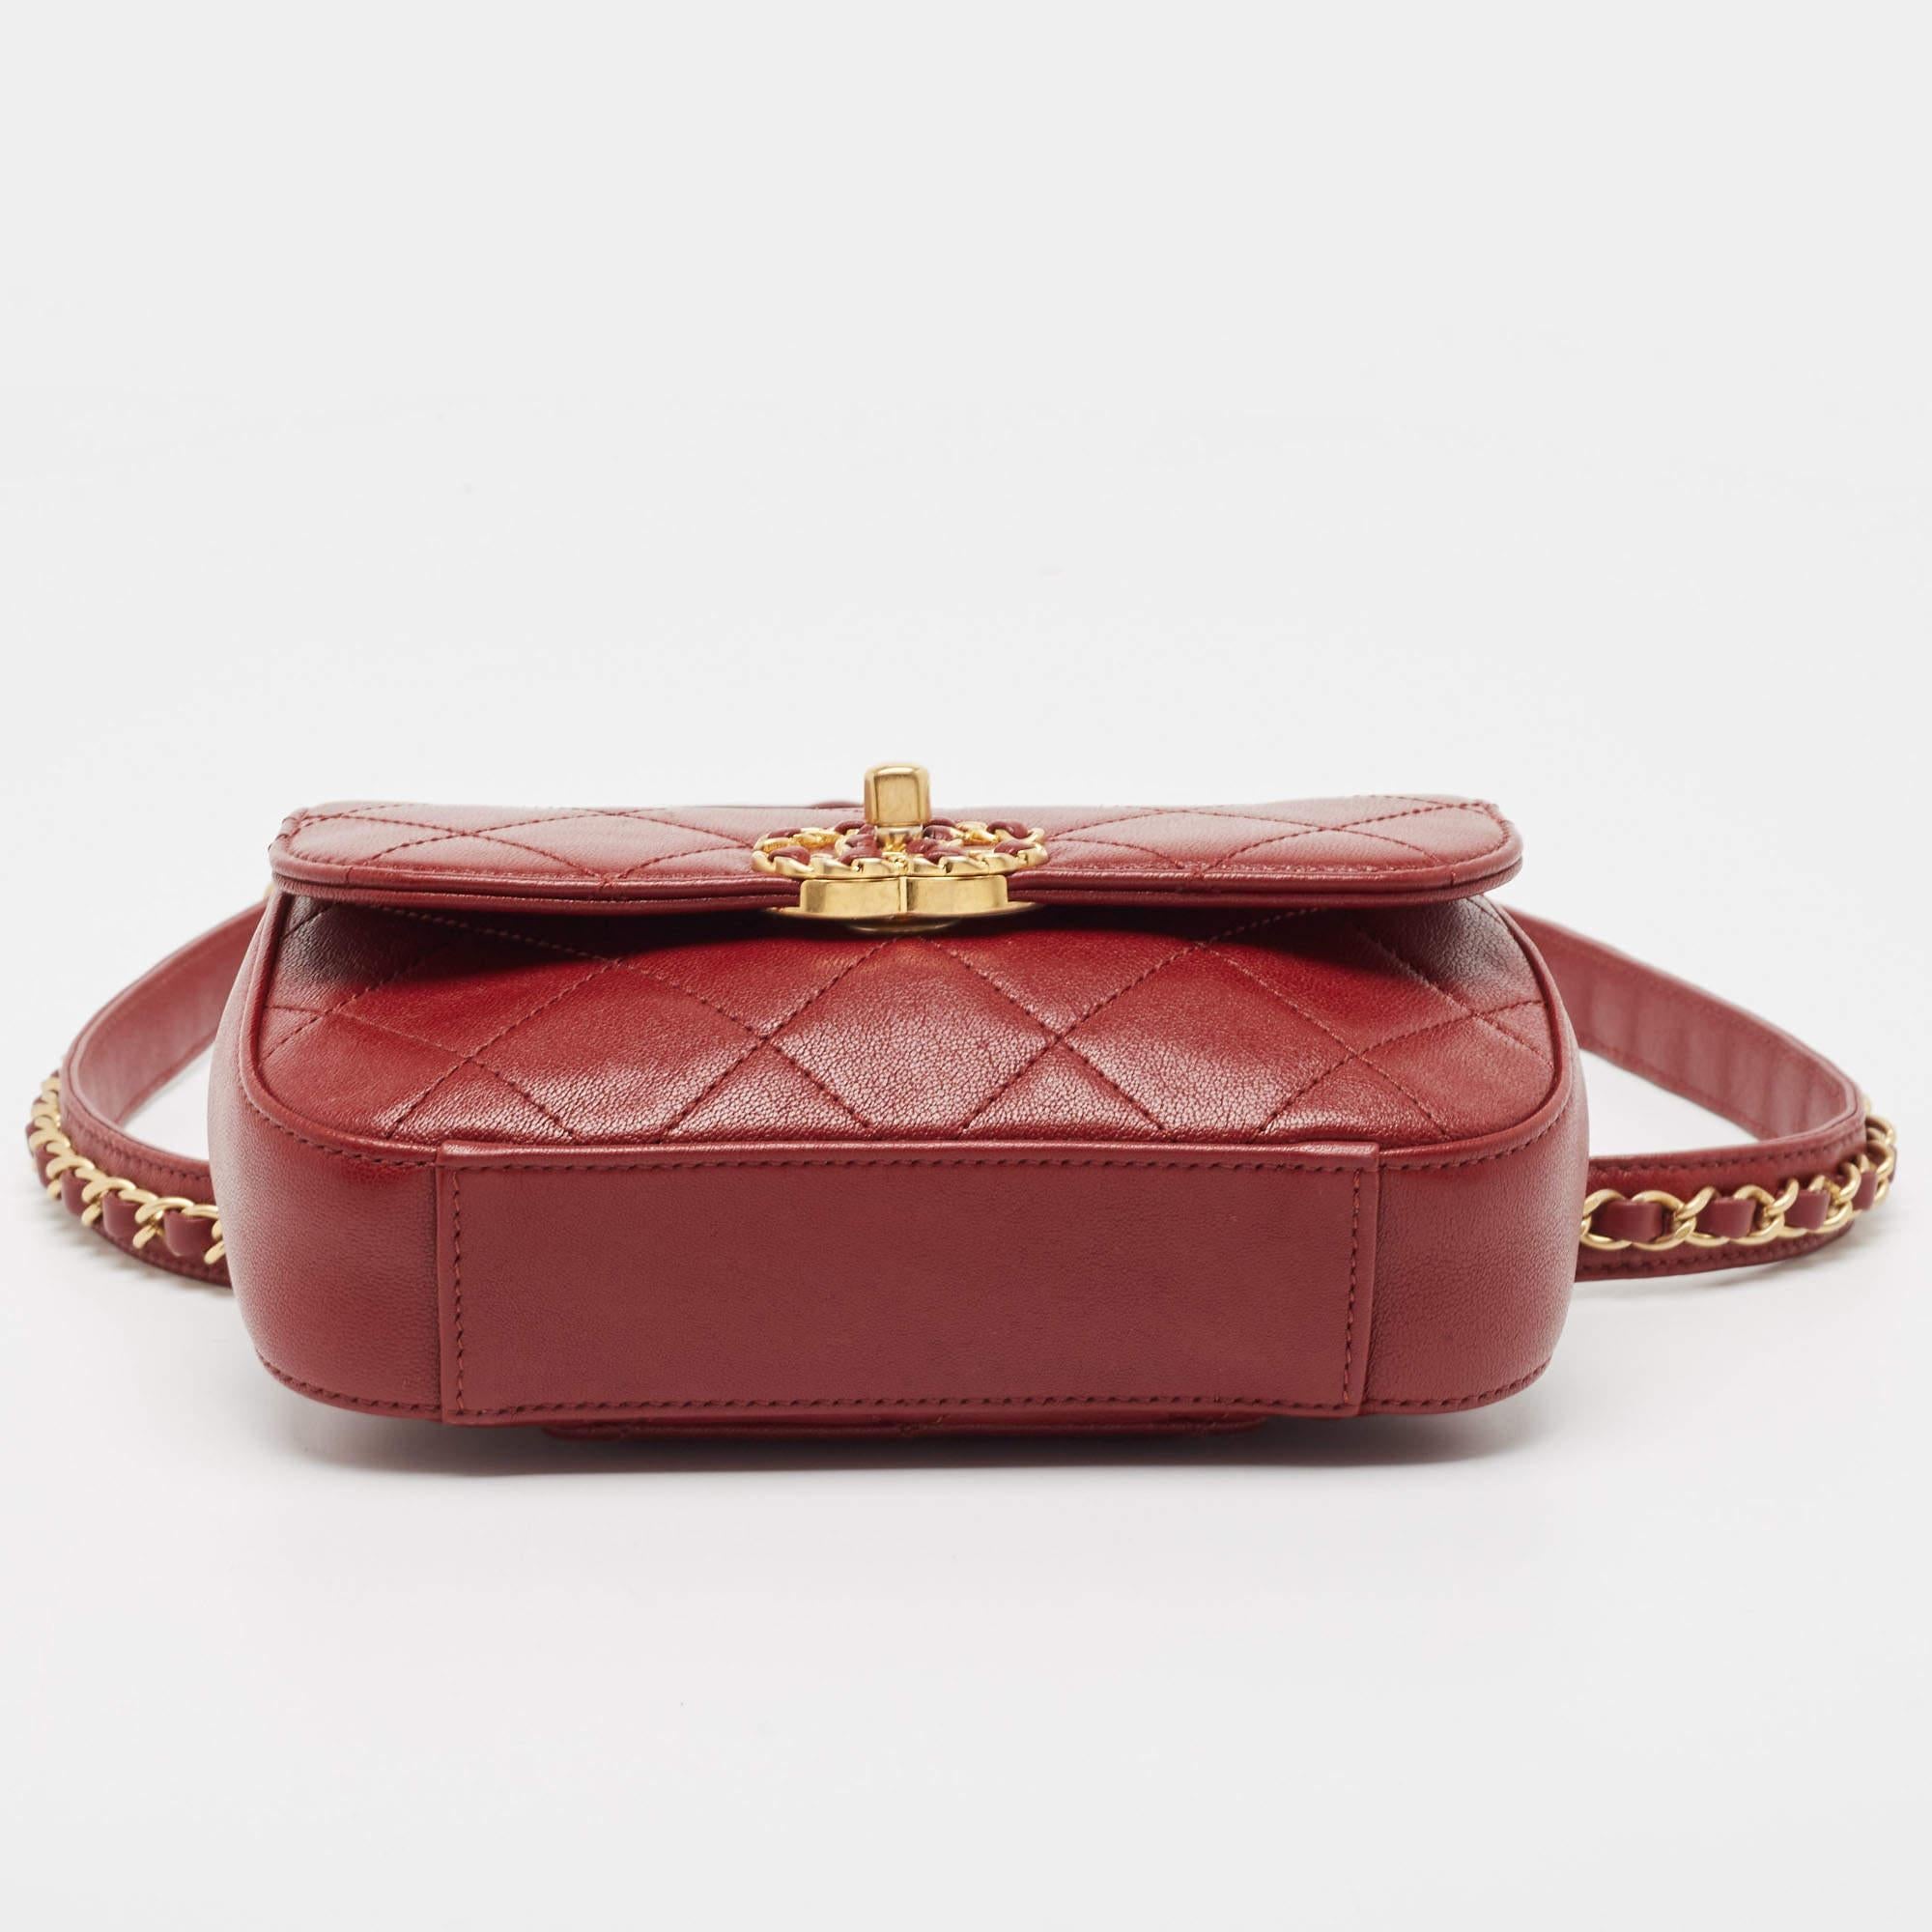 Chanel Dark Red Quilted Leather CC Flap Belt Bag For Sale 4